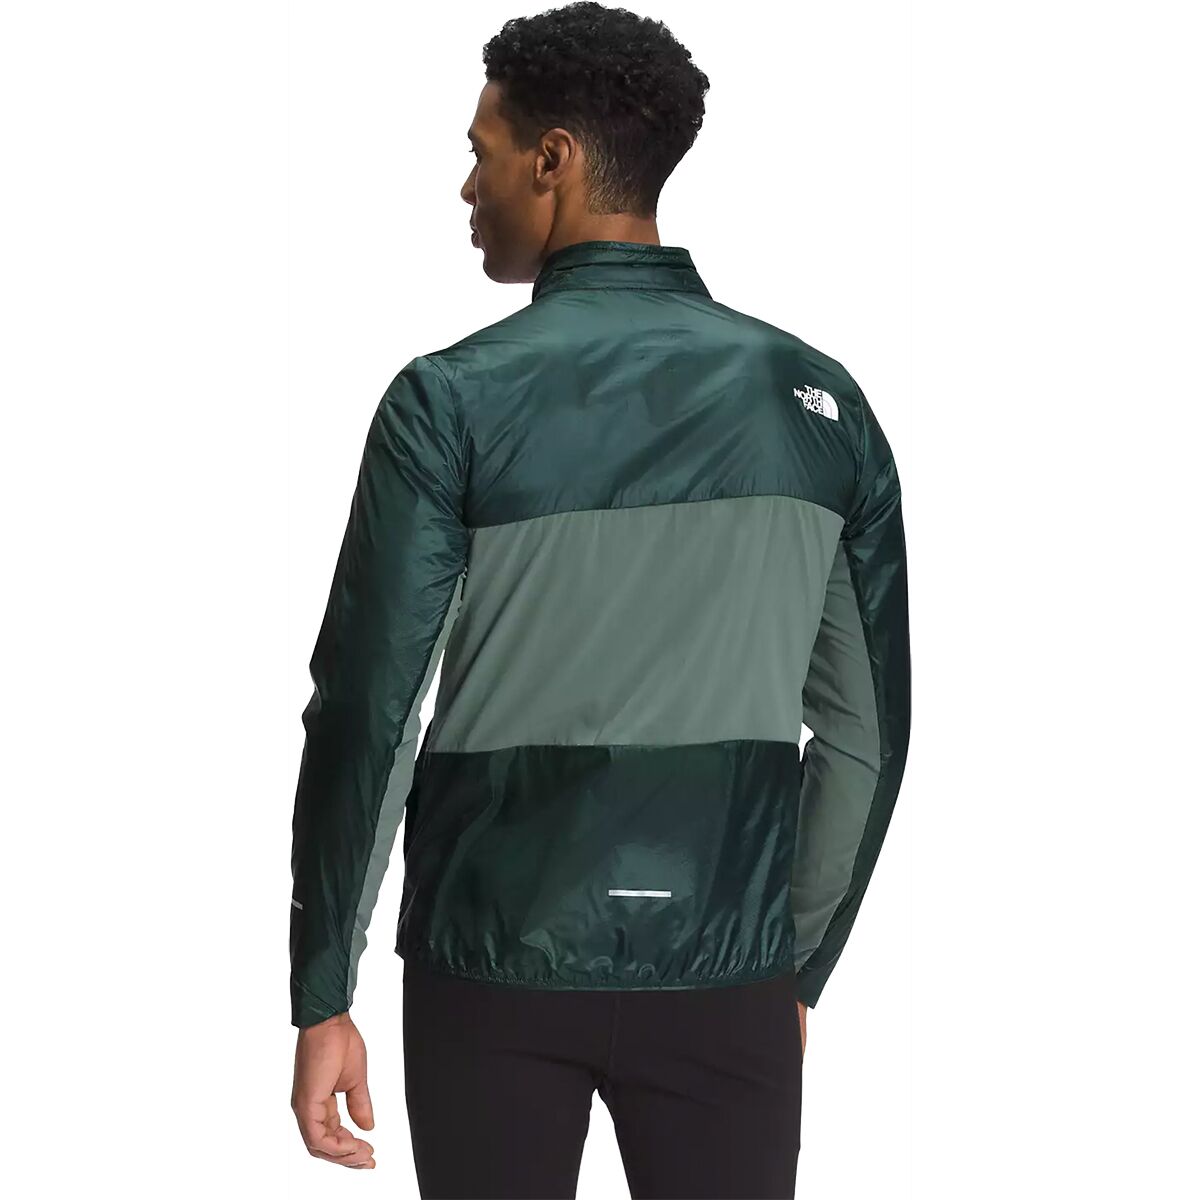 The North Face Winter Warm Jacket - Men's - Clothing